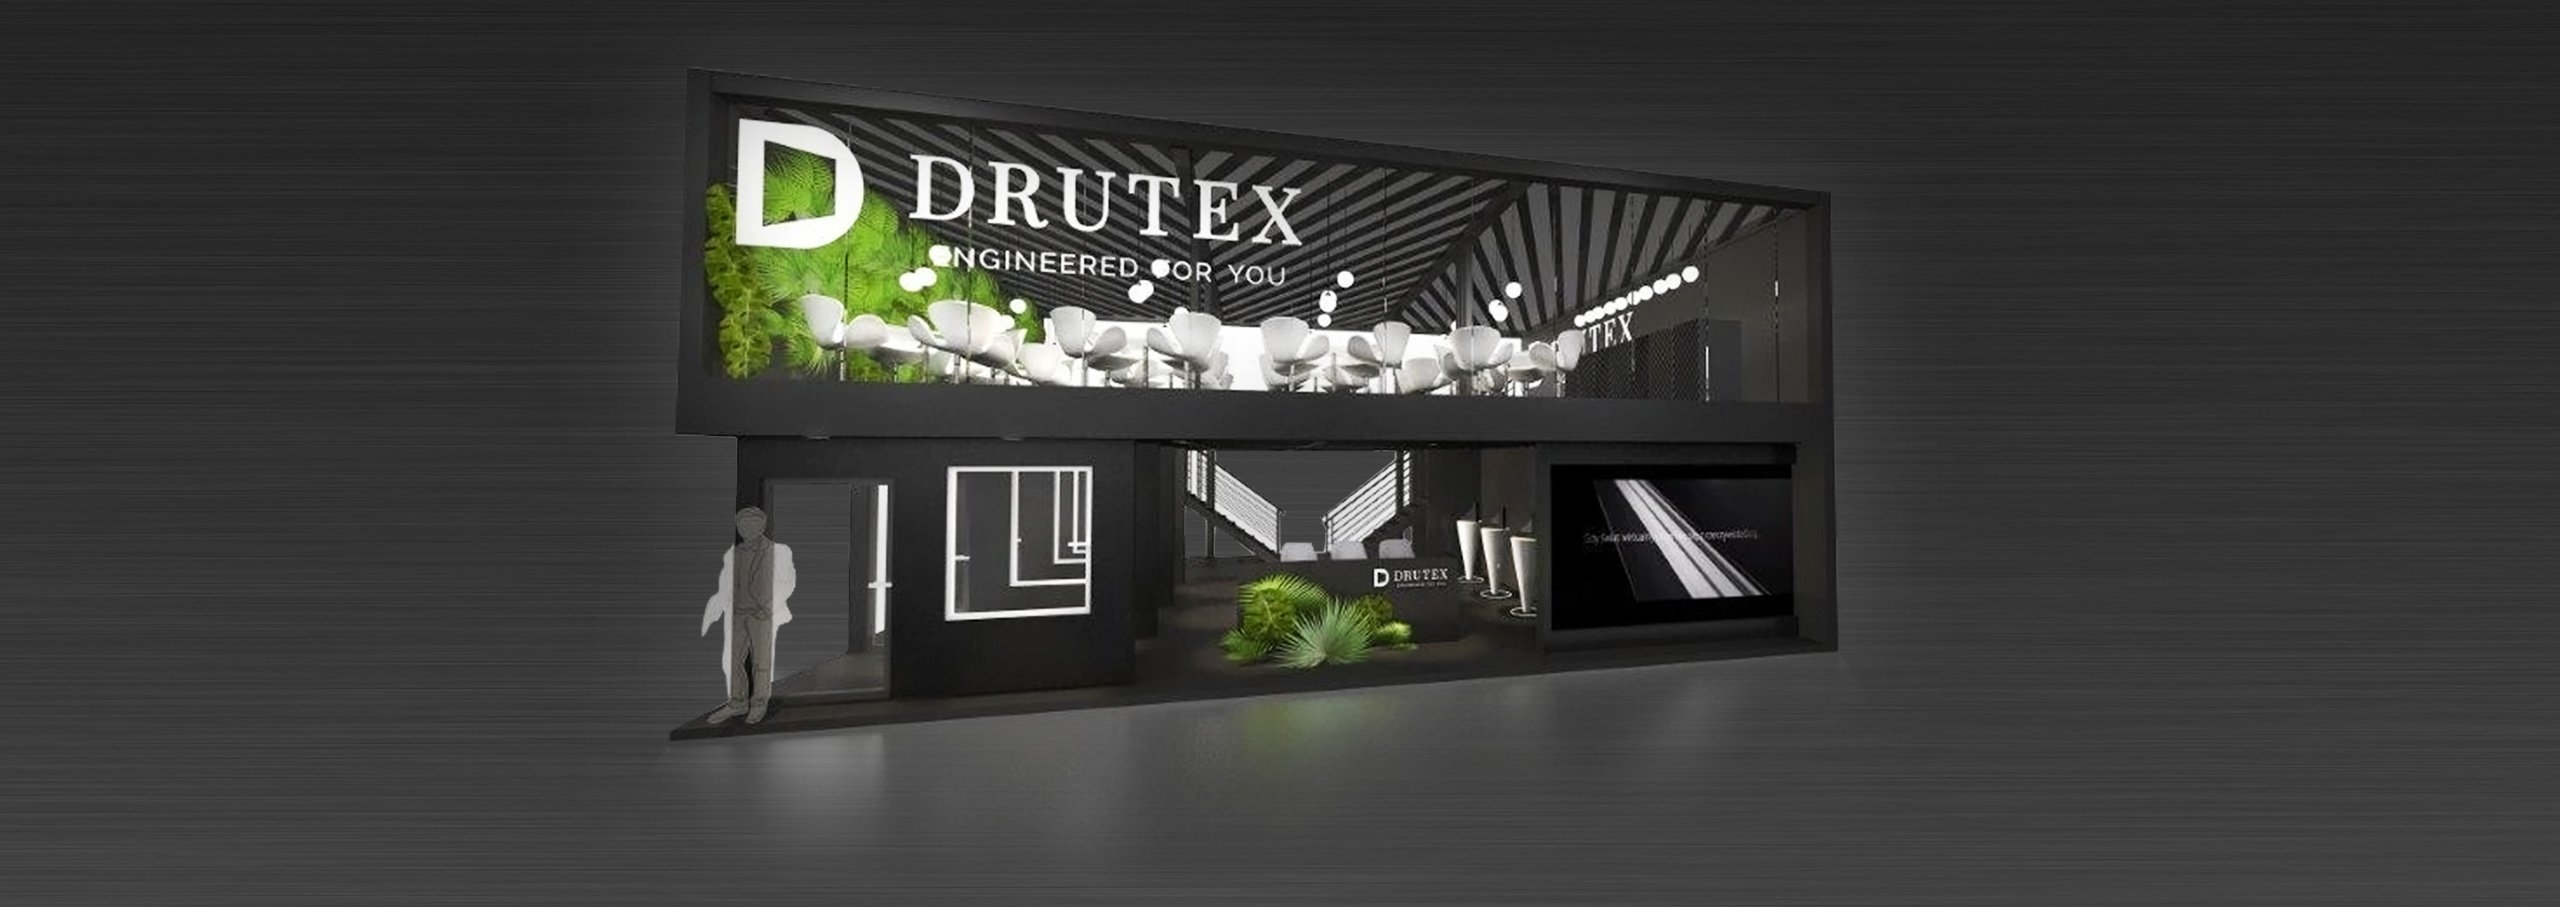 Drutex at the 2018  Fensterbau Frontale trade fair in Germany!